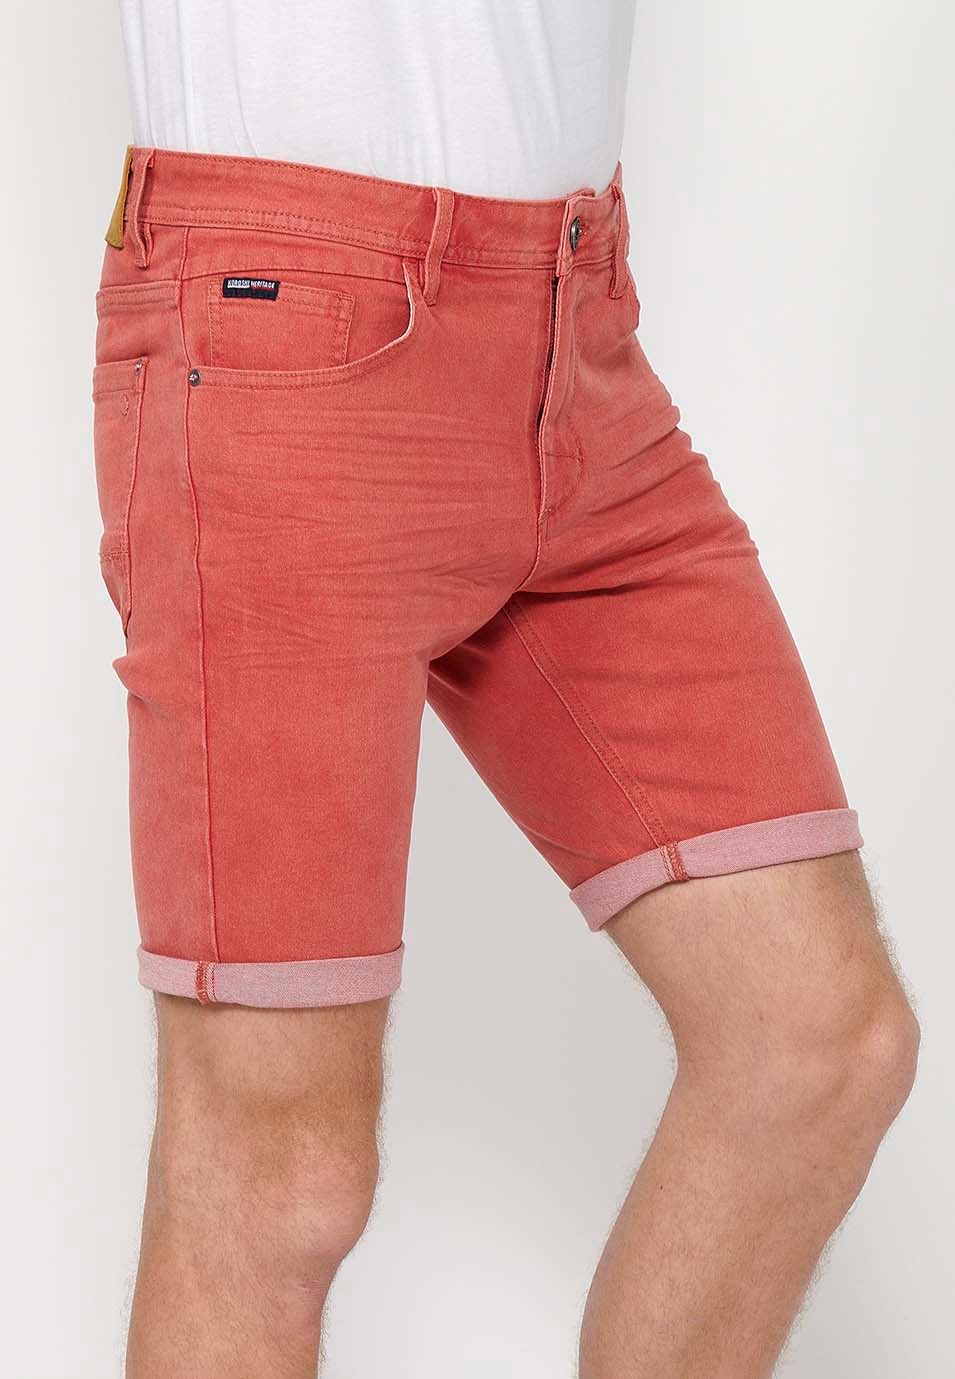 Shorts with a turn-up finish with front zipper and button closure and five pockets, one with a match pocket, in Red for Men 4